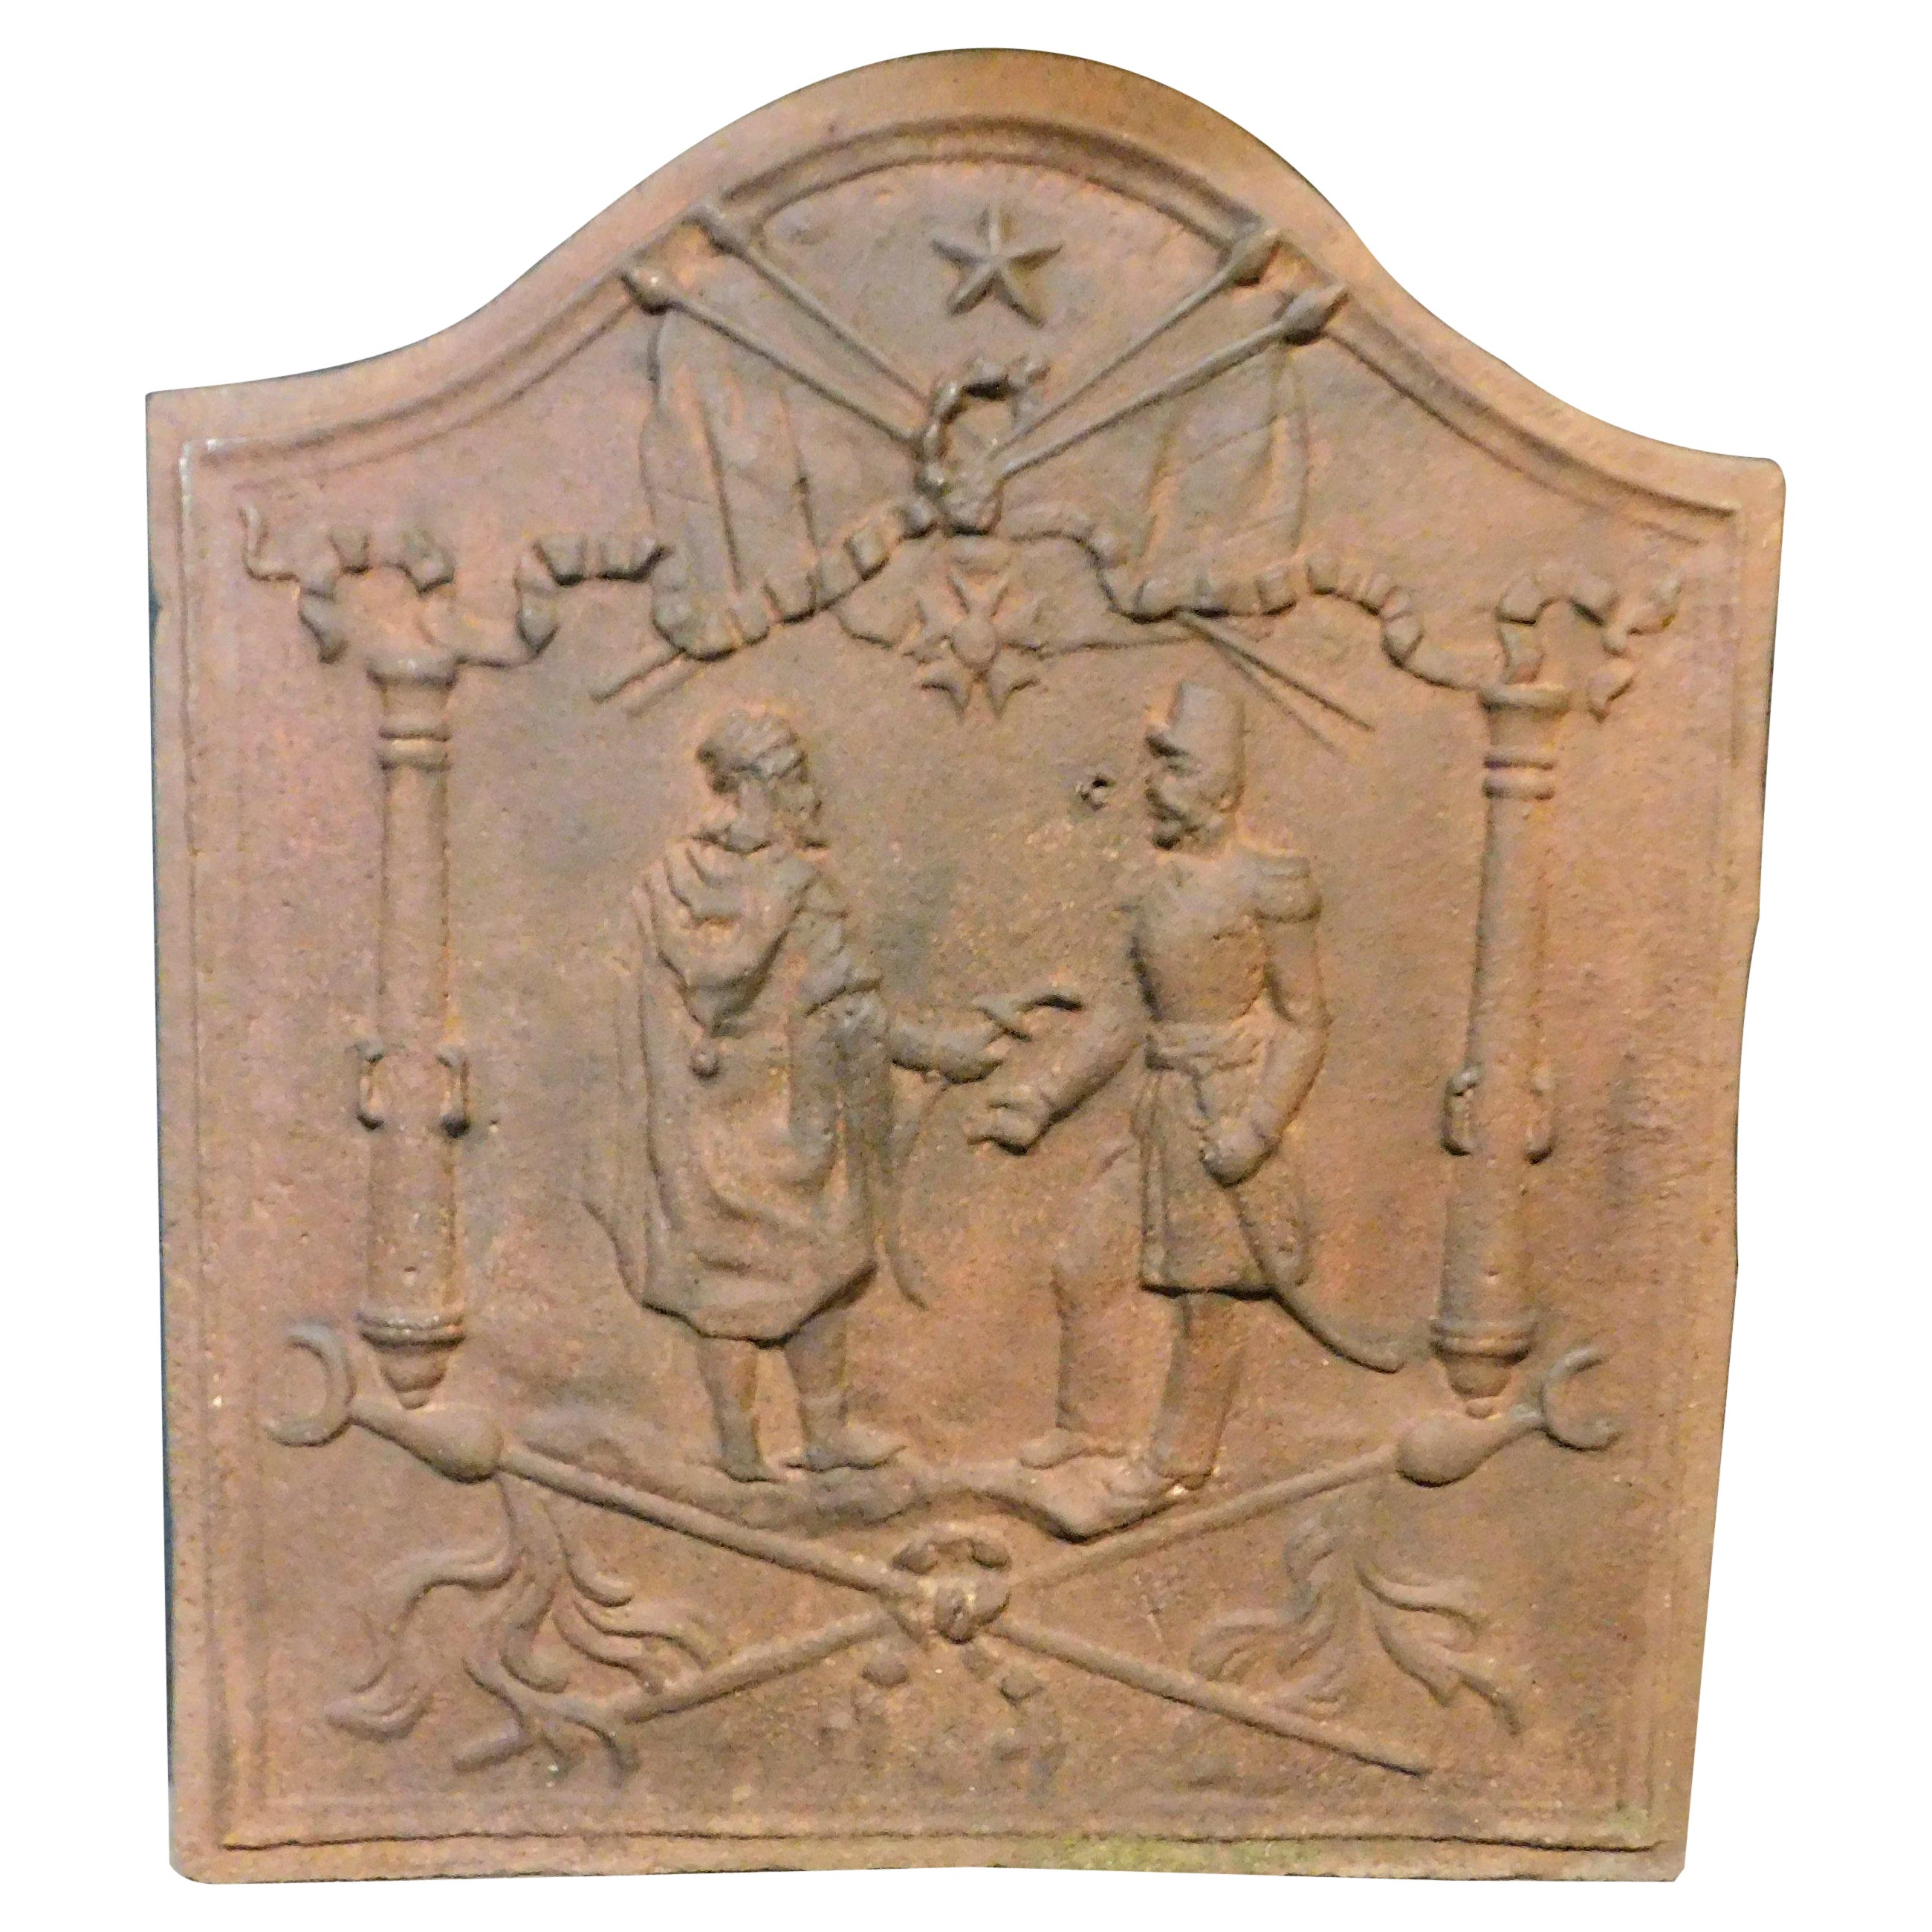 Cast iron fireplace back plate, richly carved with human figures, 19th century